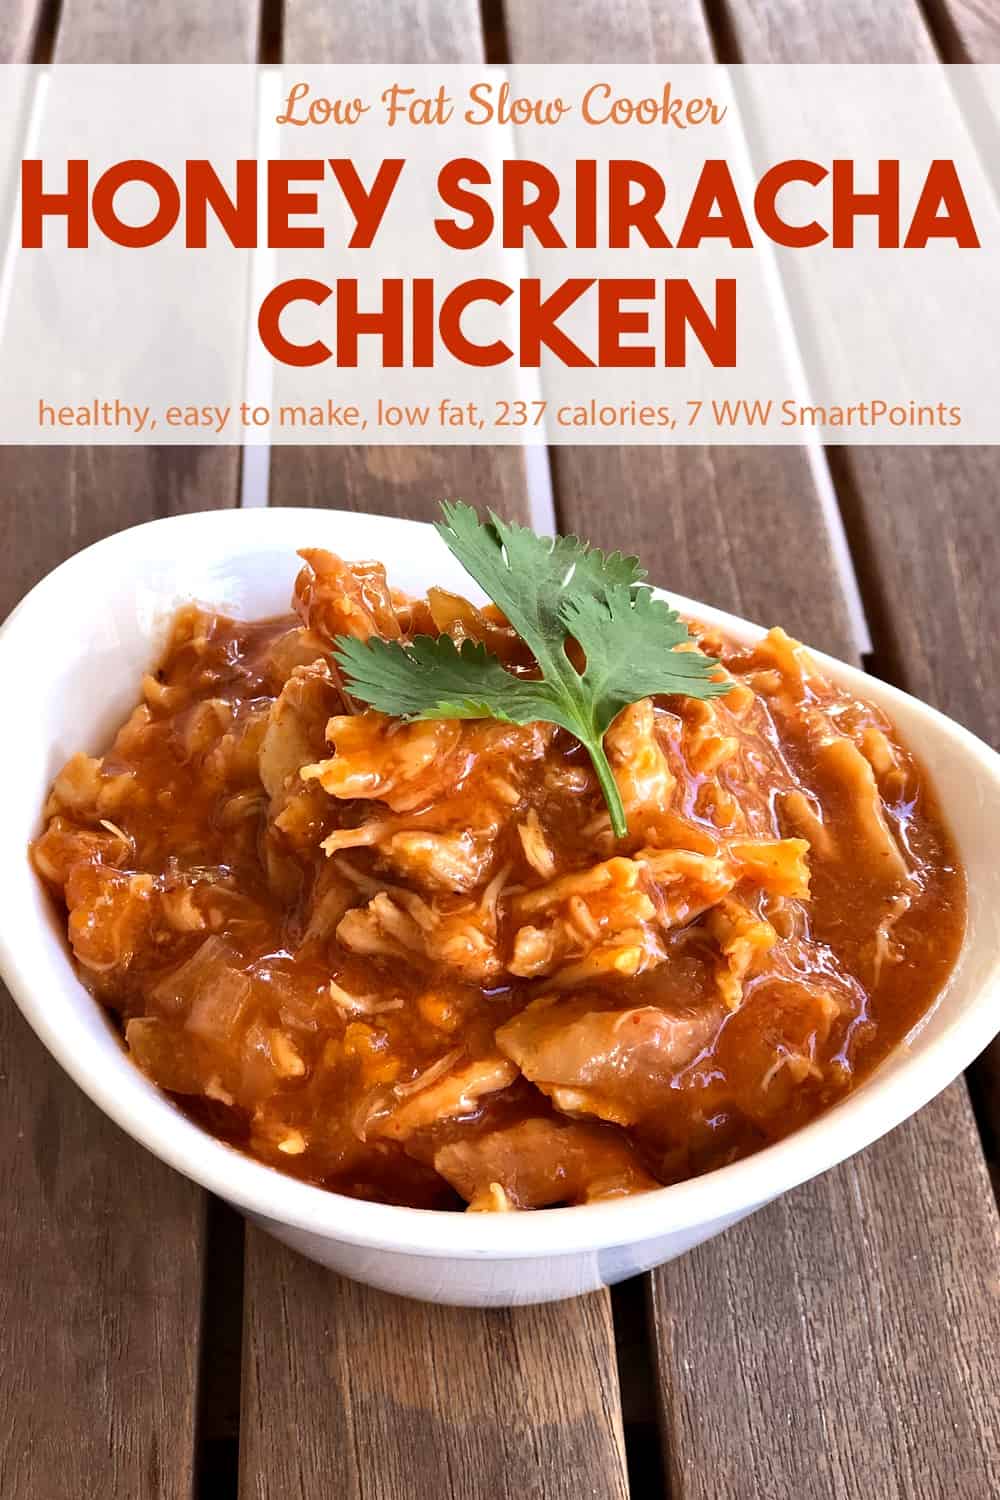 Low fat honey sriracha shredded chicken in a white bowl on a wood table.